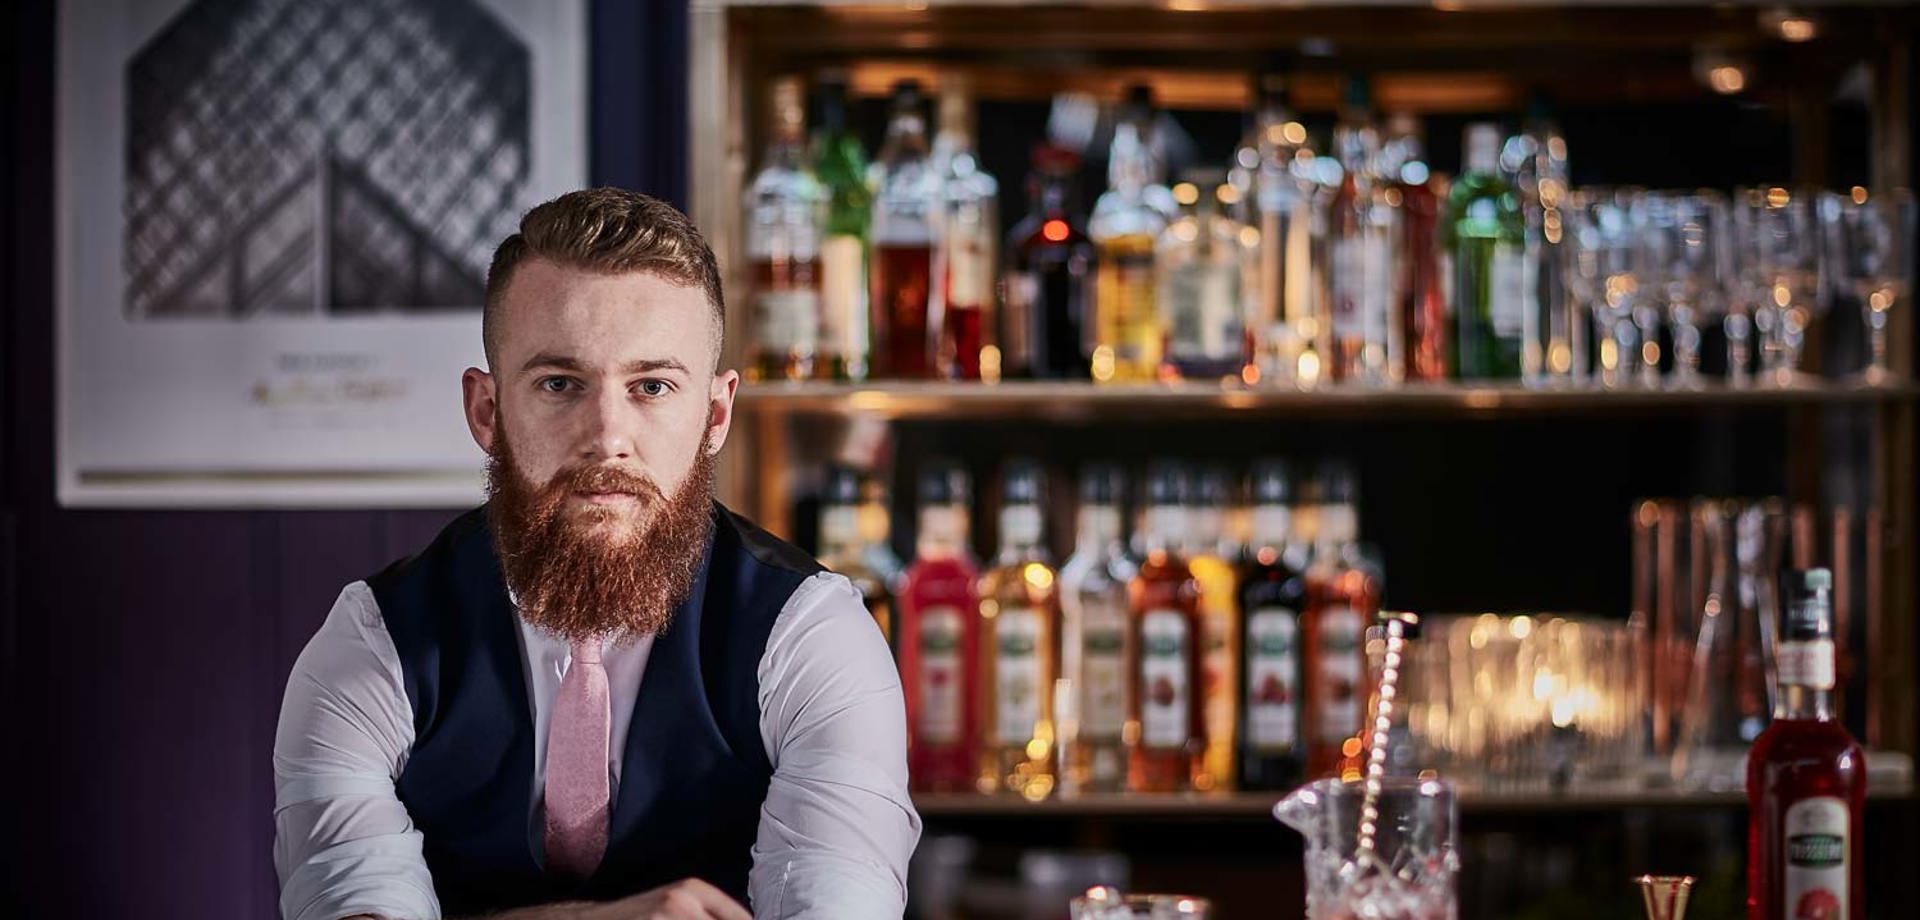 A male bartender standing at a bar. The backbar is filled with glasses, Mathieu Teisseire syrup bottles and cocktail shakers. There is a cocktail mixing glass on the bar filled with with red liquid and a bar spoon.